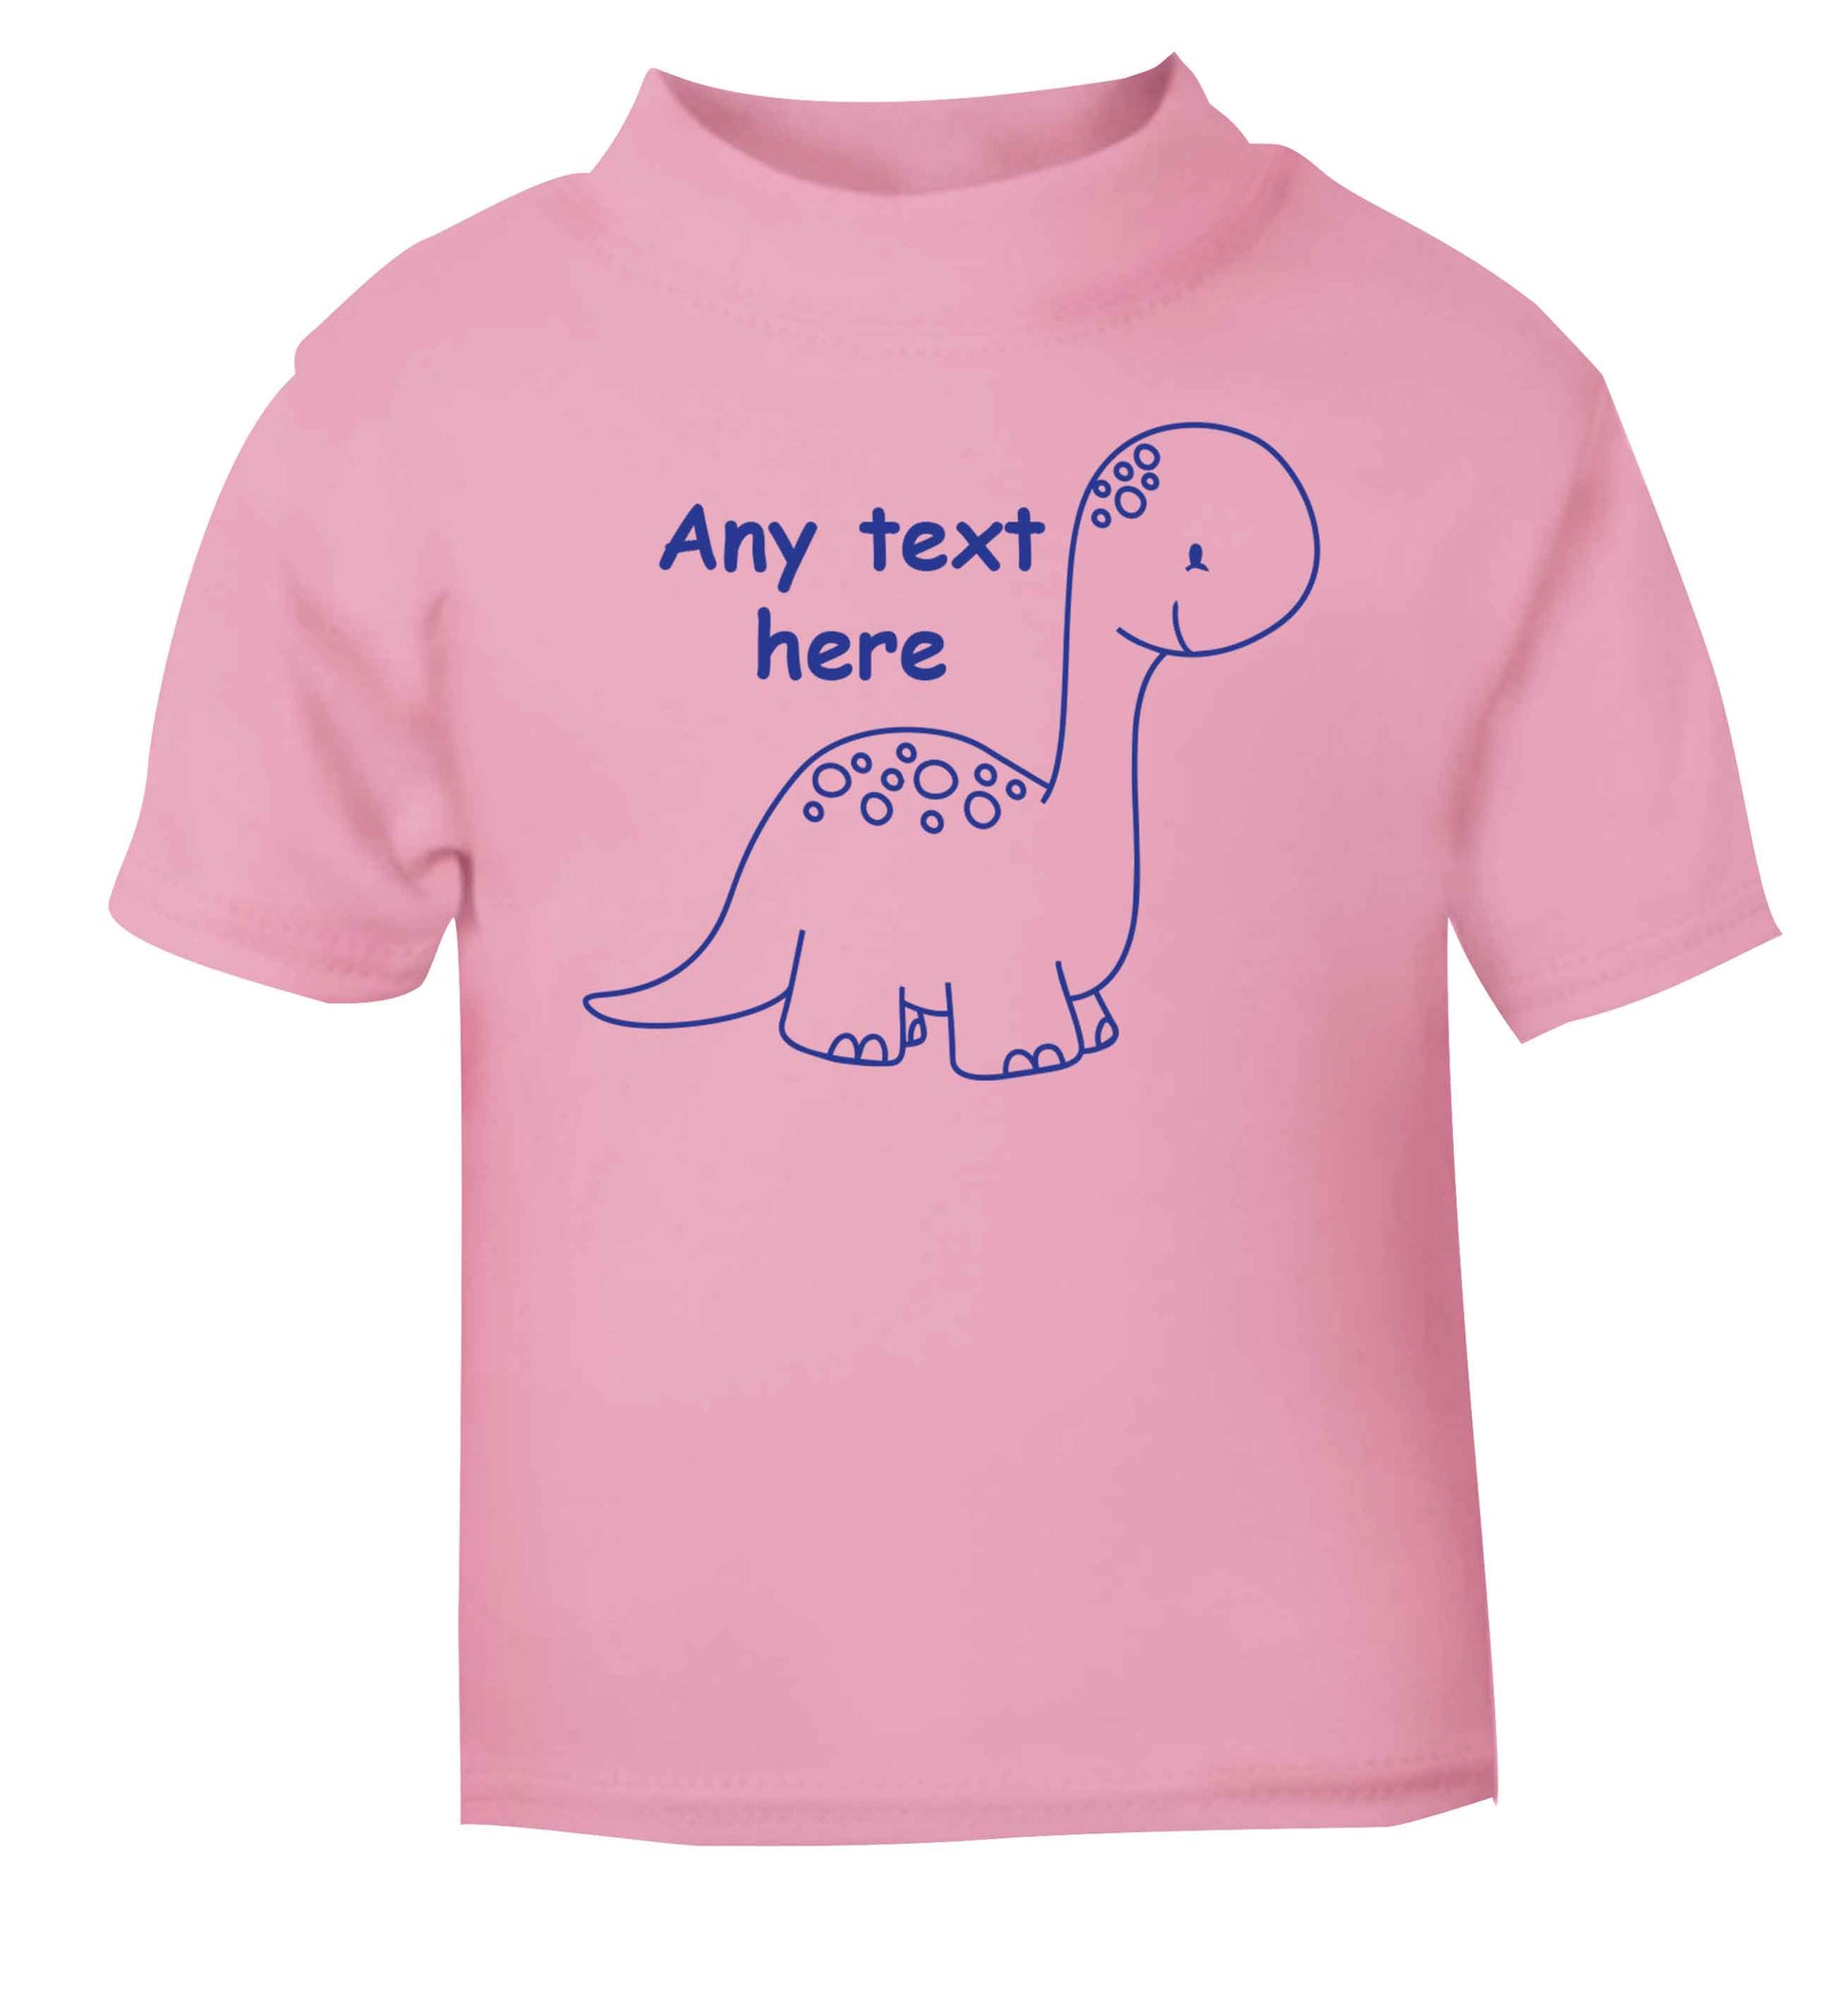 Dinosaur any text light pink baby toddler Tshirt 2 Years